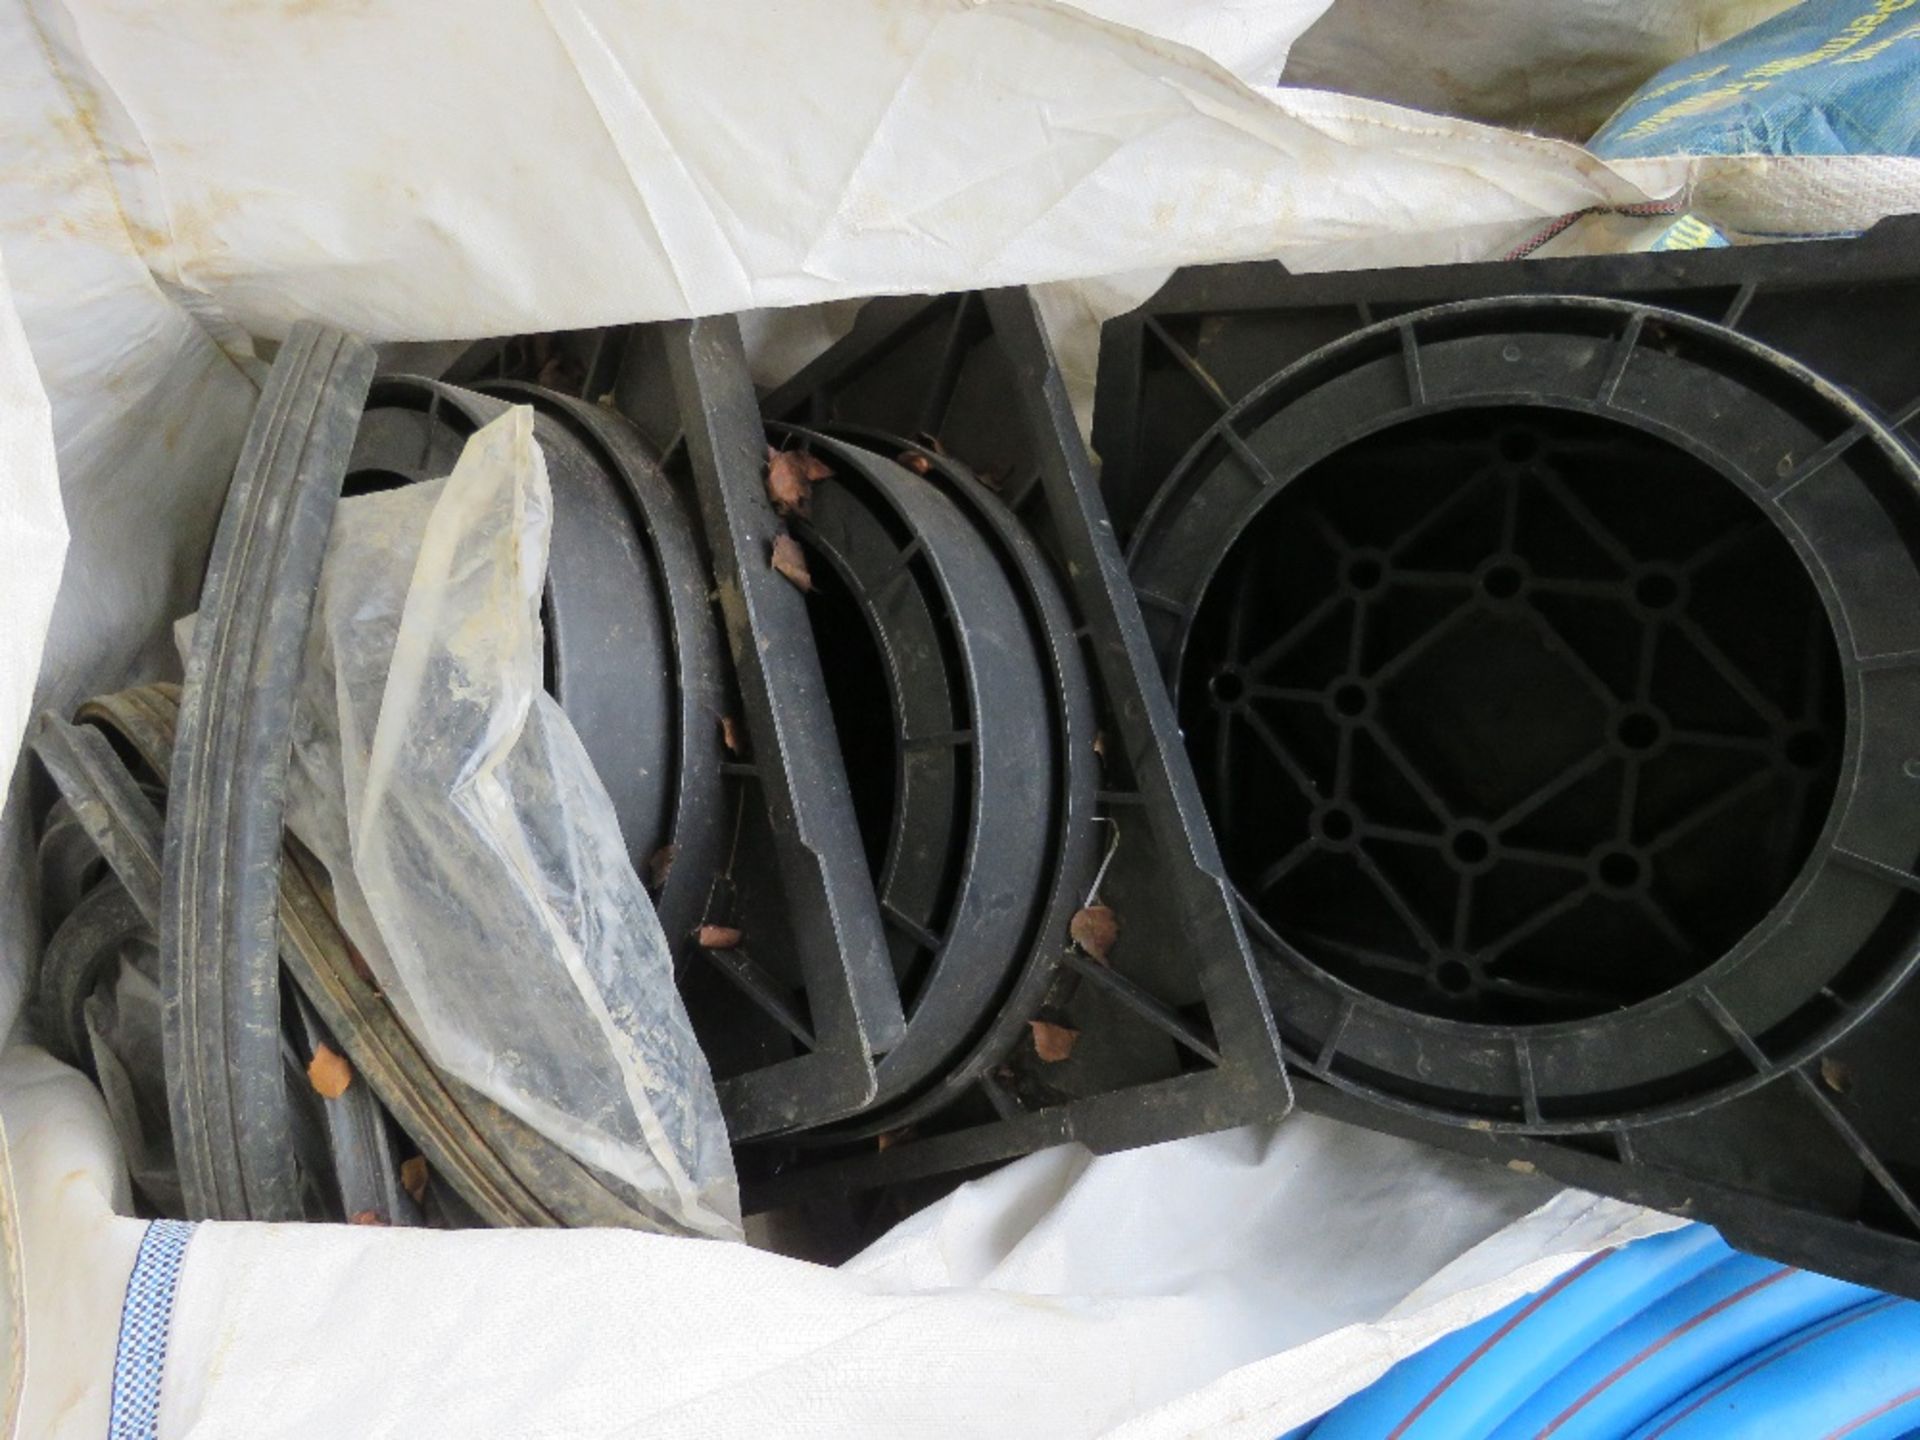 2 X BULK BAGS CONTAINING ASSORTED BLACK PLASTIC DRAINAGE FITTINGS AND MANHOLE PARTS. DIRECT FROM COM - Image 5 of 5